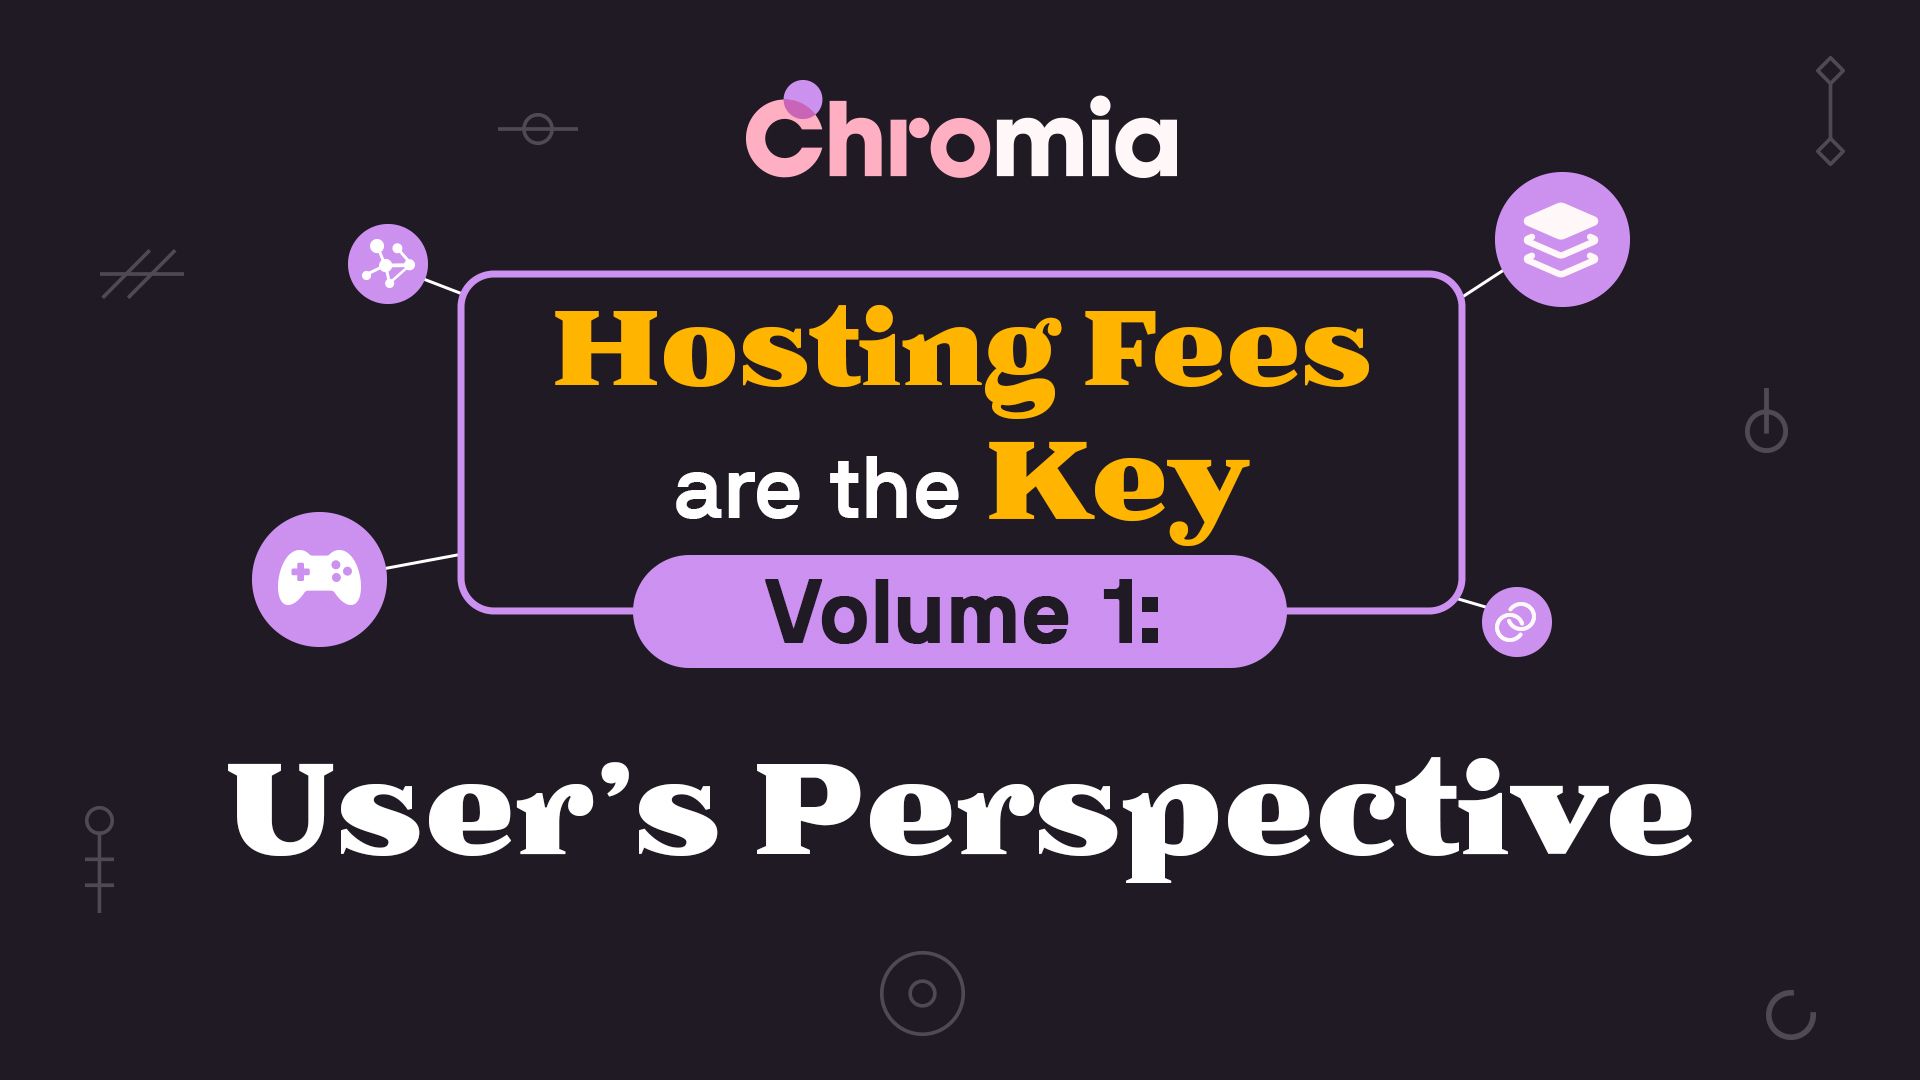 Hosting Fees are the Key, Volume 1: User’s Perspective